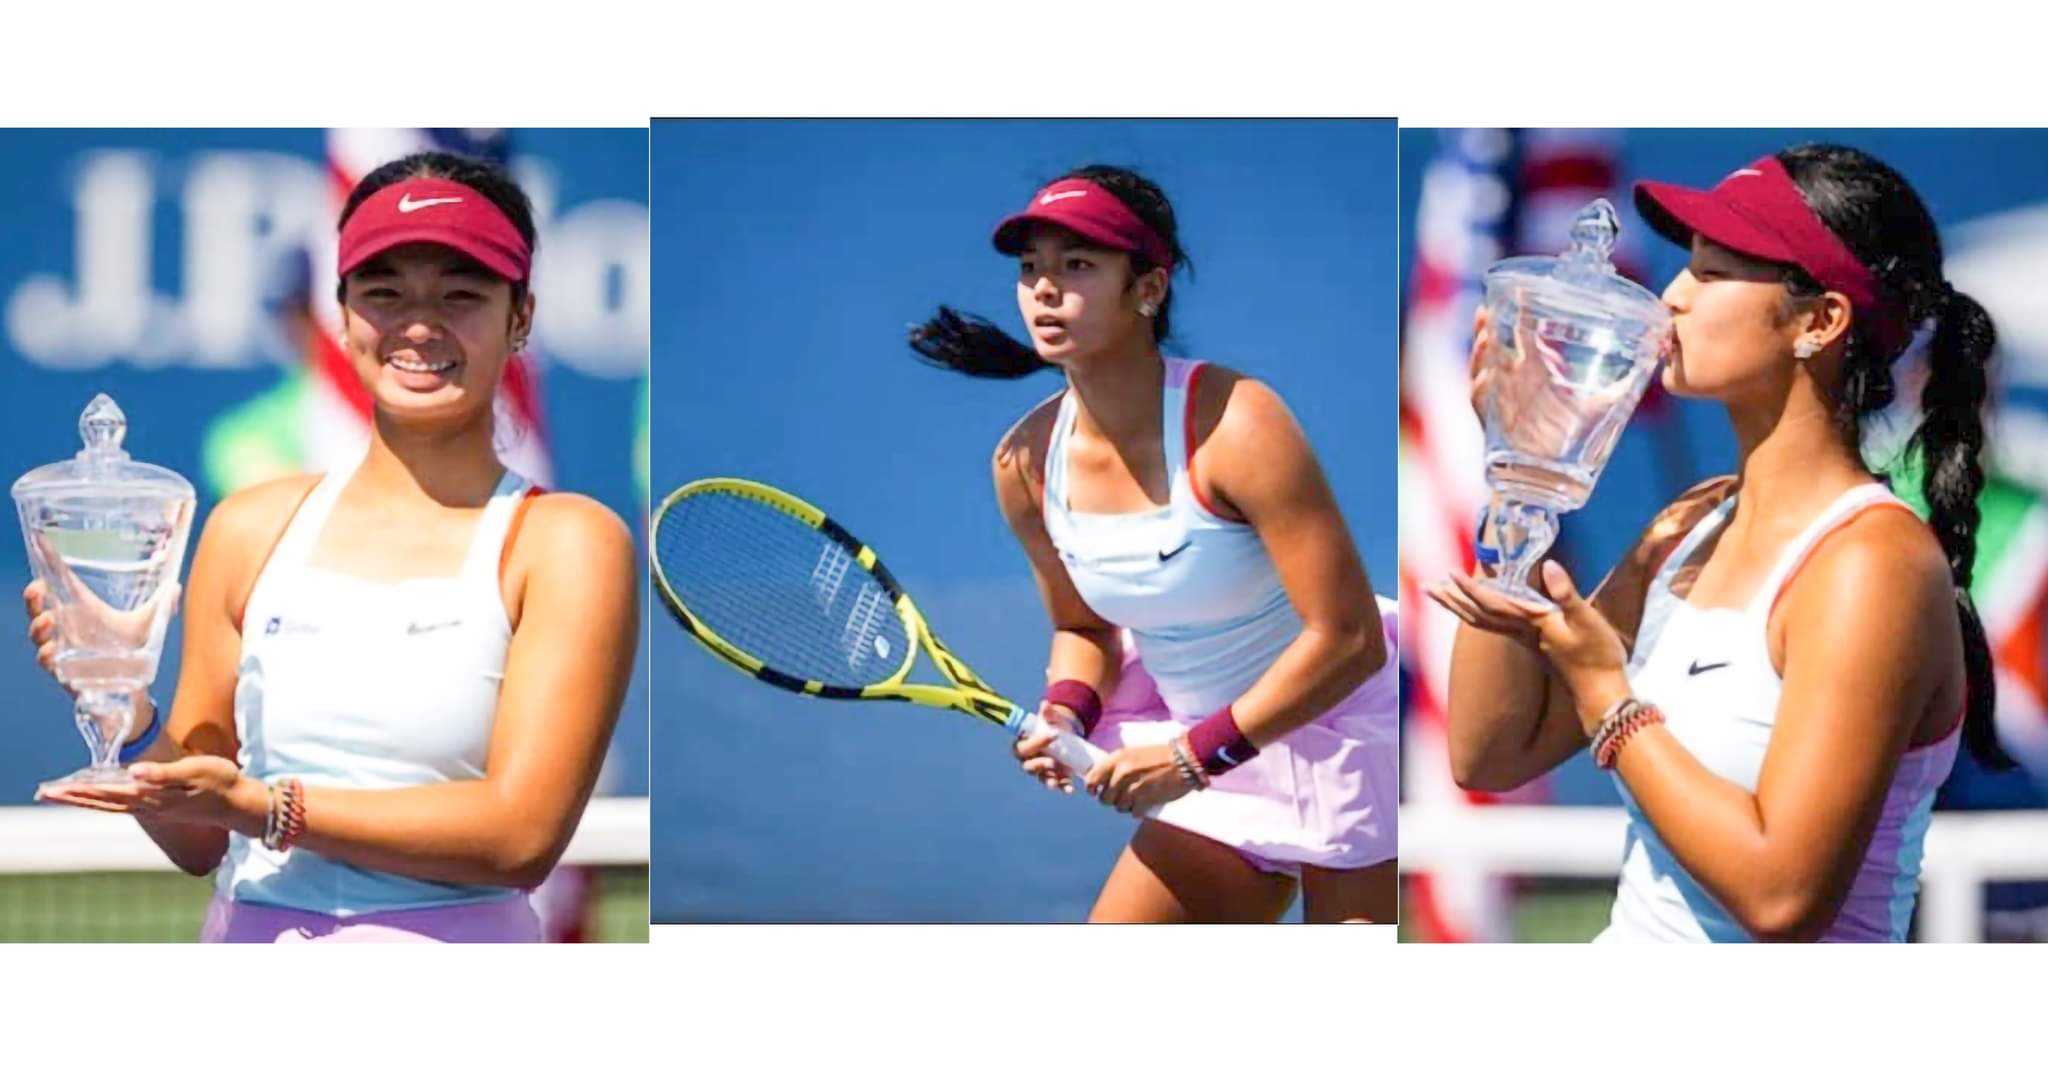 Alex Eala bags PH’s historic first junior Grand Slam championship title at US Open